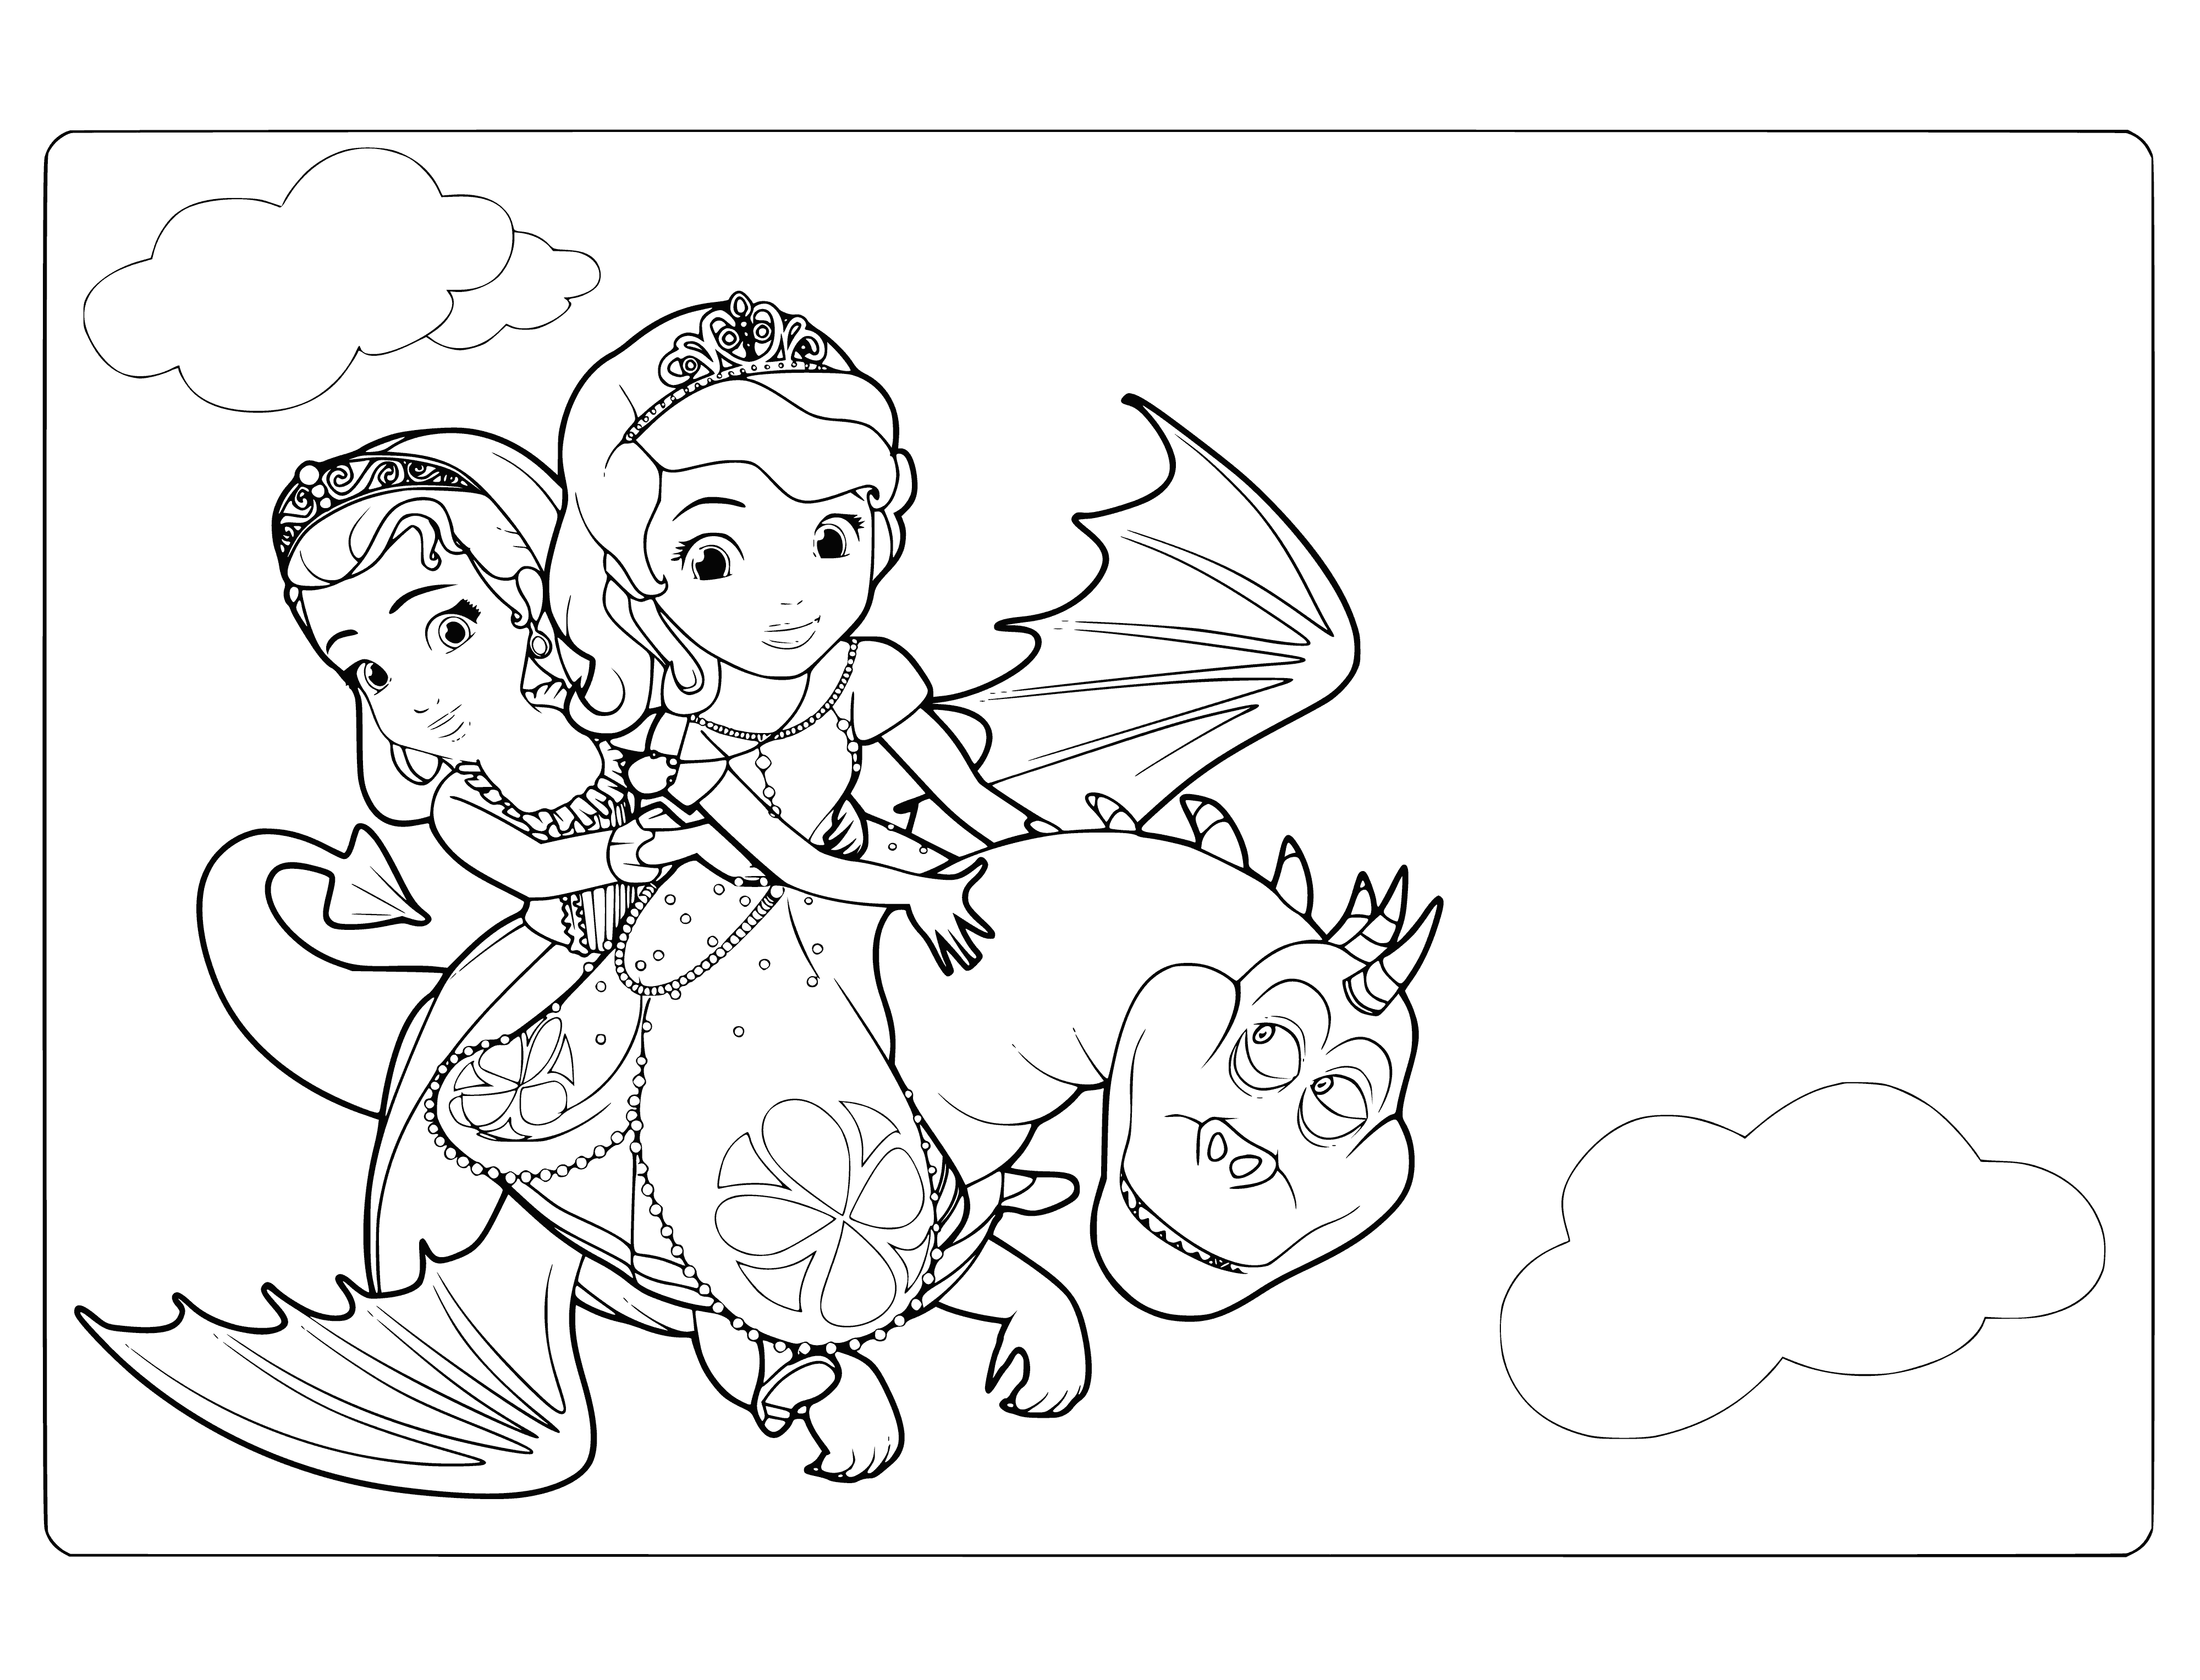 coloring page: Sofia & Amber stand atop a pink dragon w/ a purple saddle, wearing pink & purple outfits, arms lifted in joy.